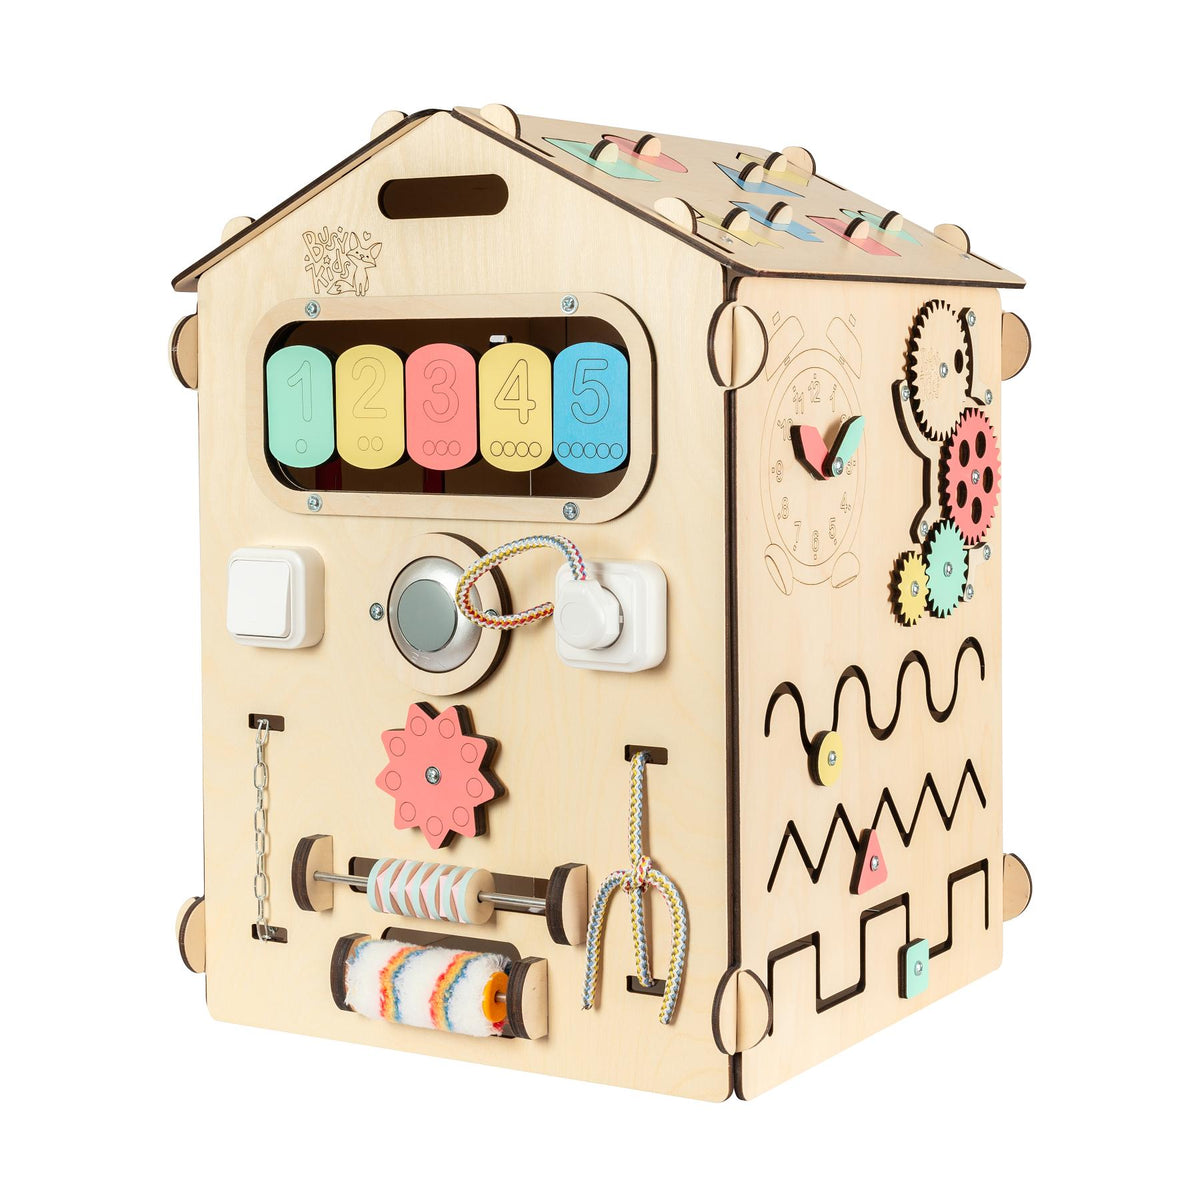 Busy House Natura - Activity Board Montessori® by Busy Kids